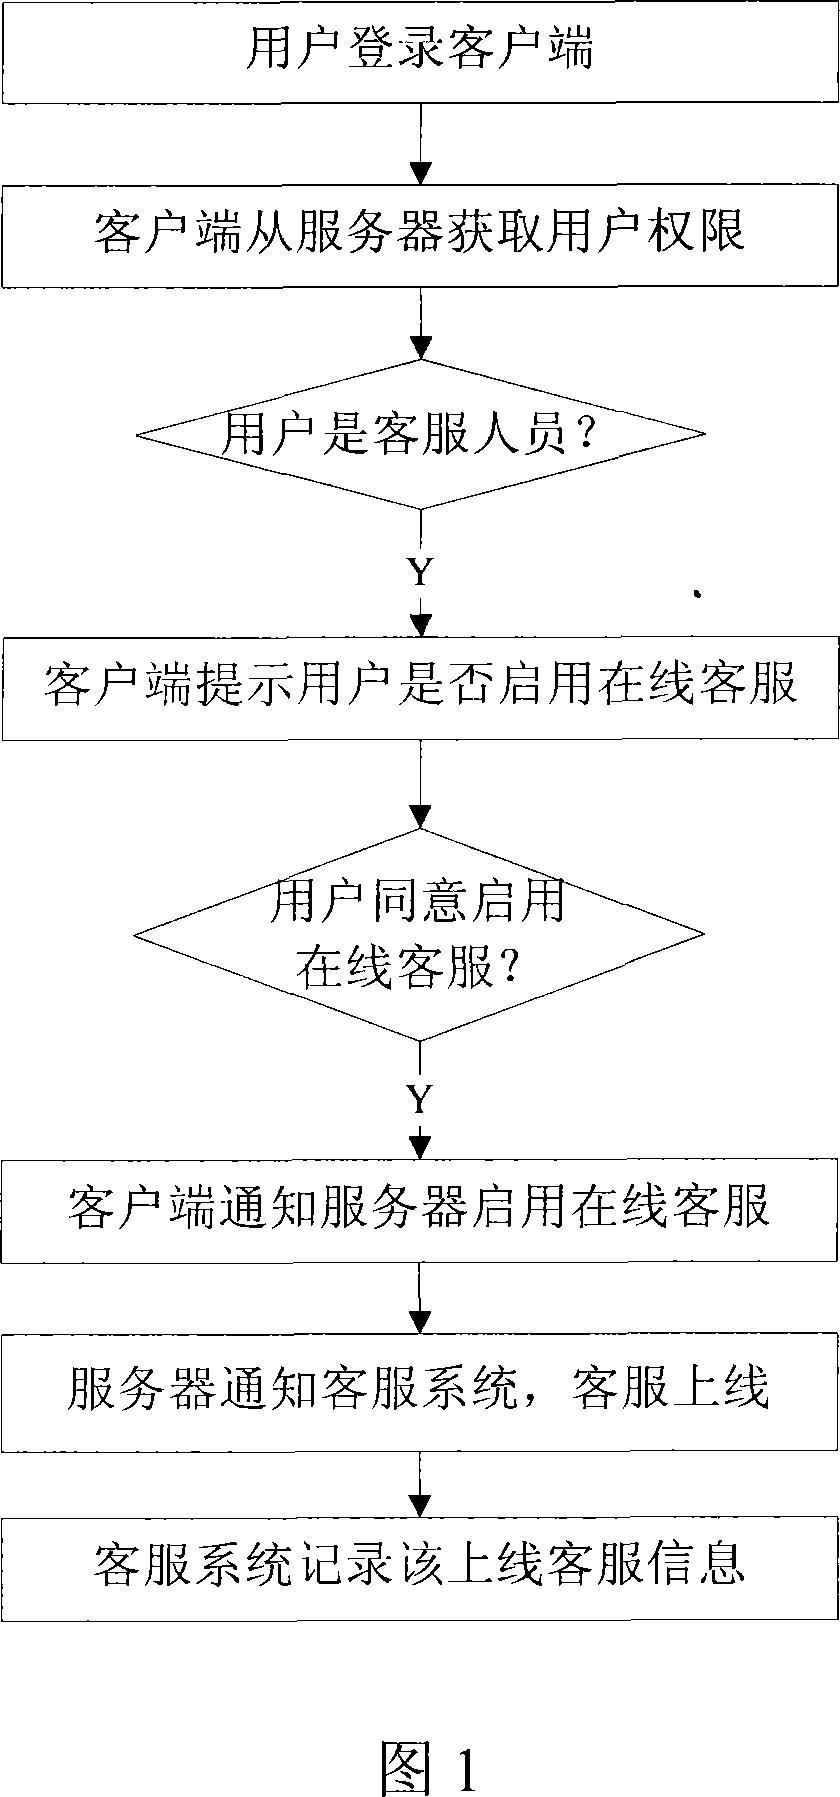 Method and system for implementing online service in enterprise instant communication